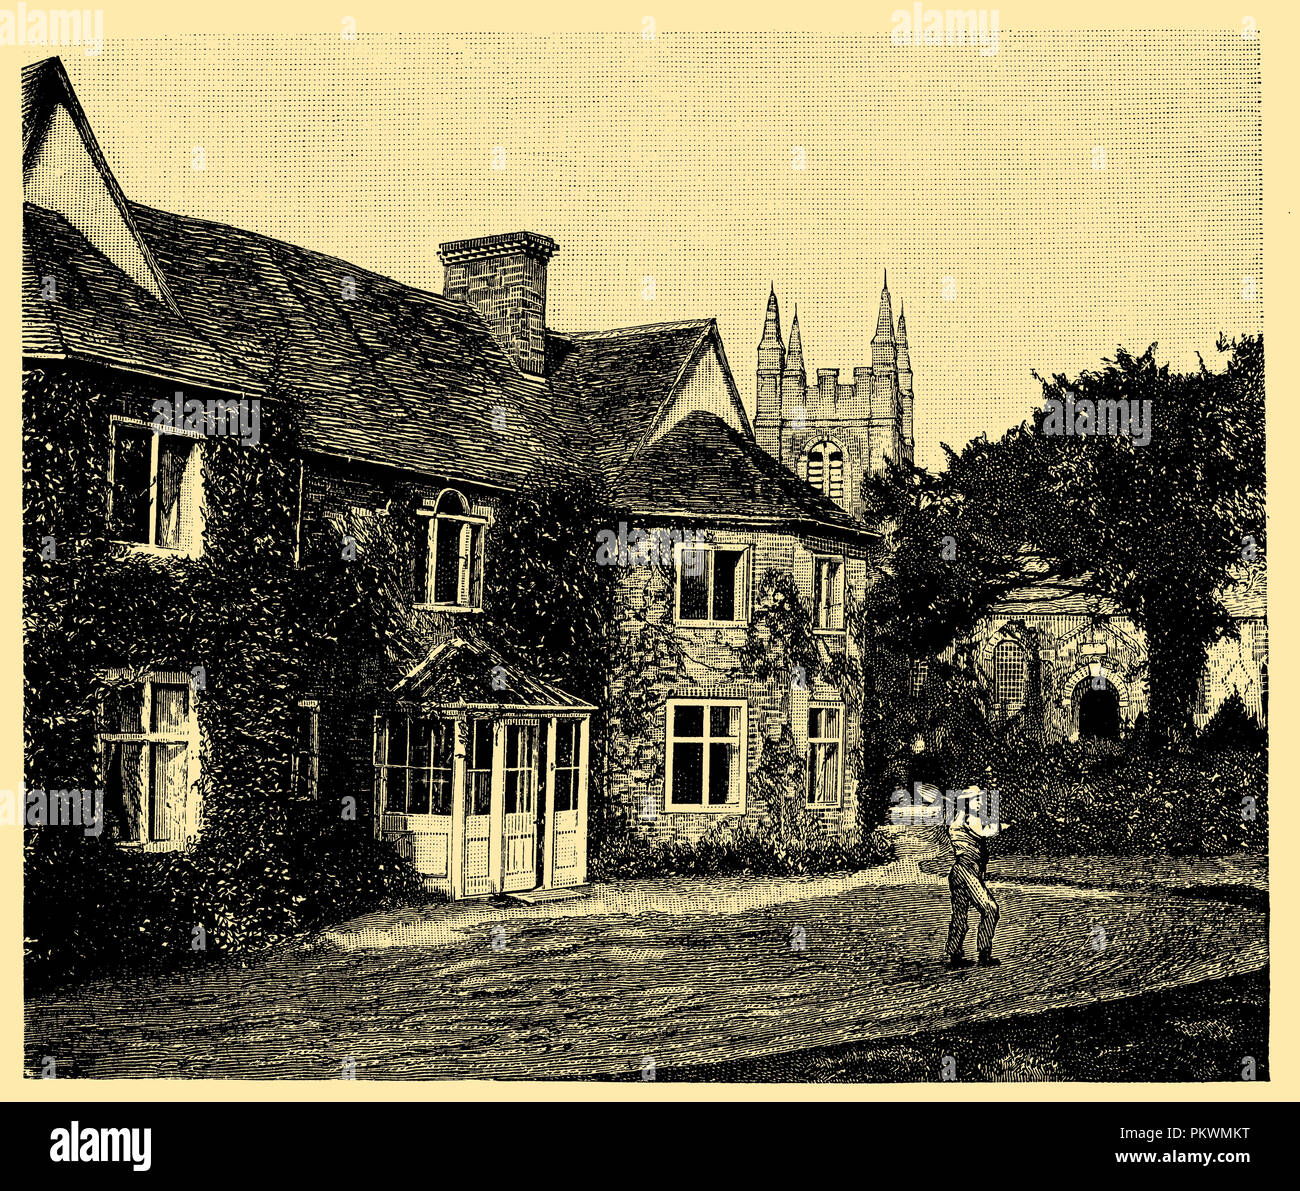 Charles Kingsley (1819-1875), English Anglican clergyman, theologian and writer: Kingsley's rectory in Eversley, Stock Photo